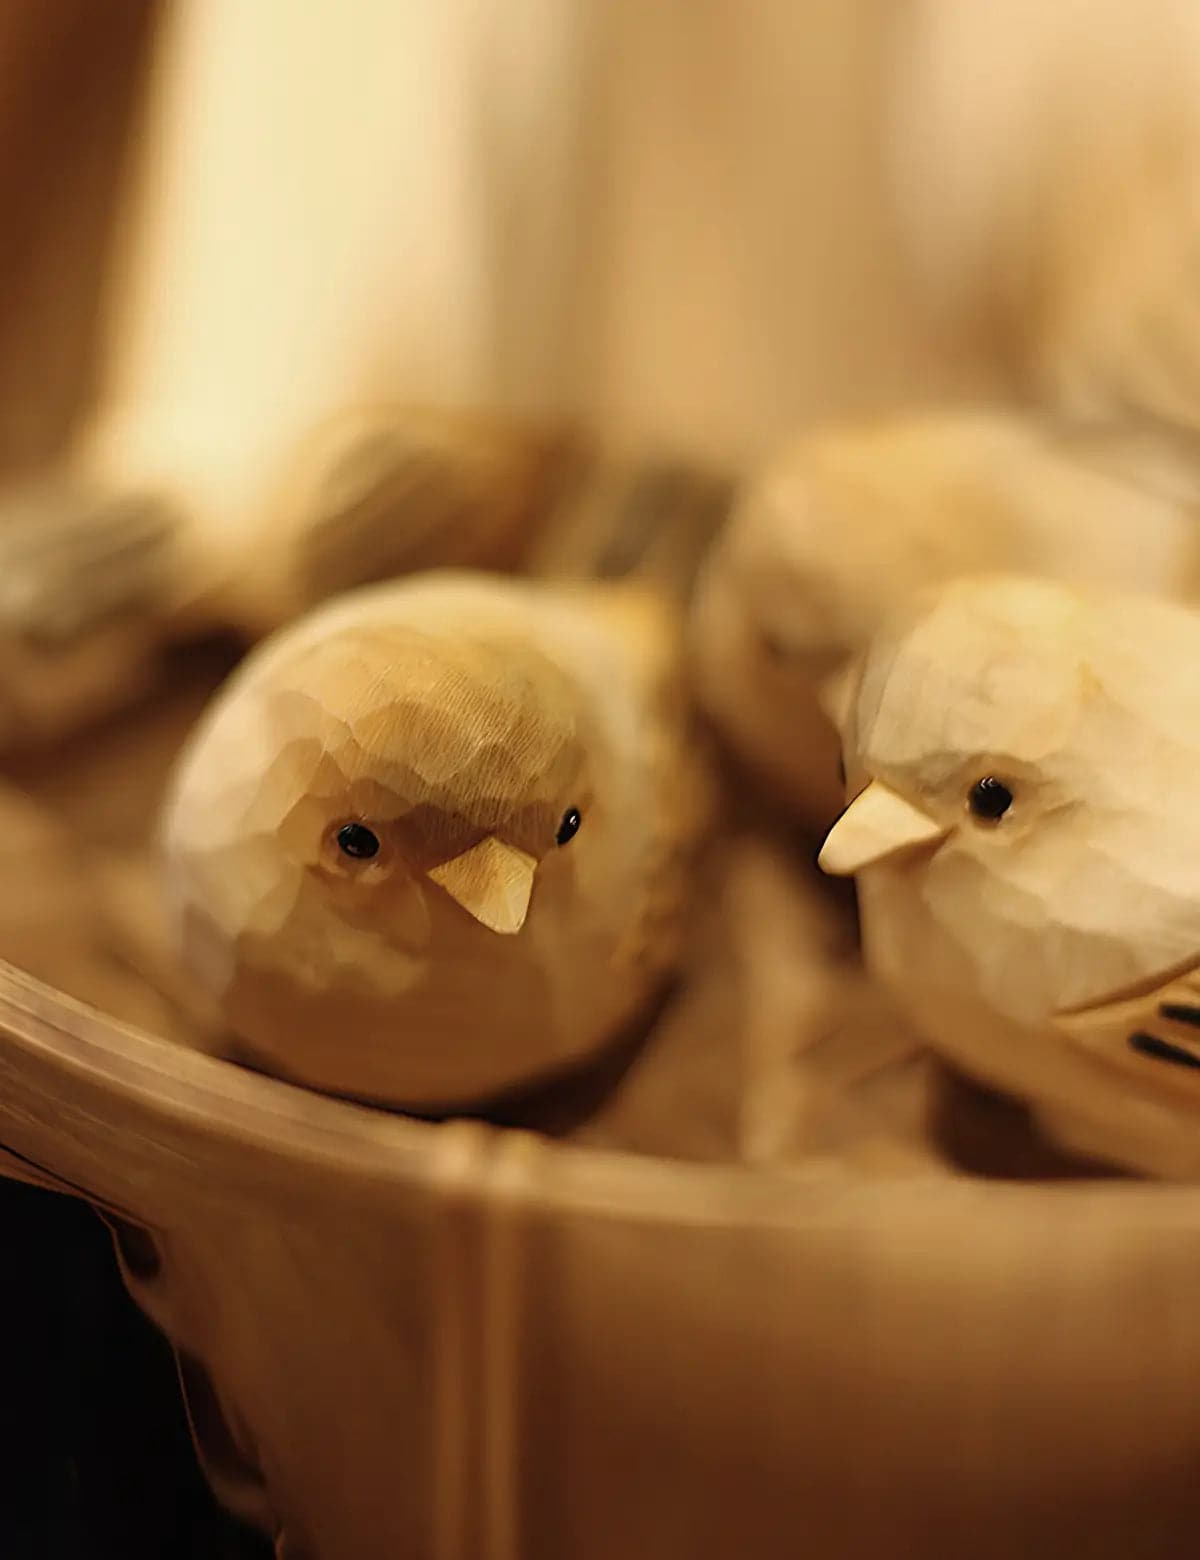 Willow-Tit-Tabletop-Decor-Carving-05